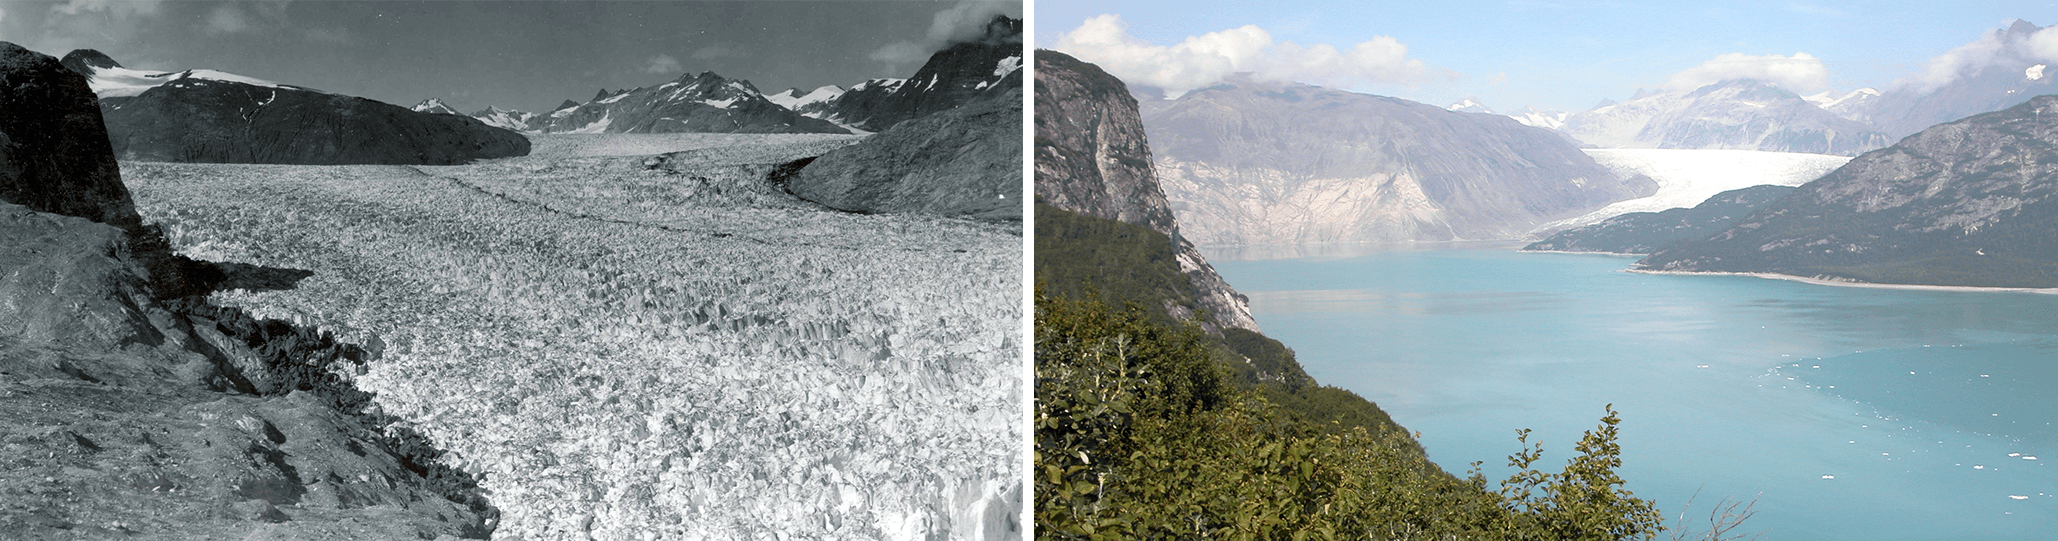 Alaska's Muir glacier in August 1941 and August 2004.